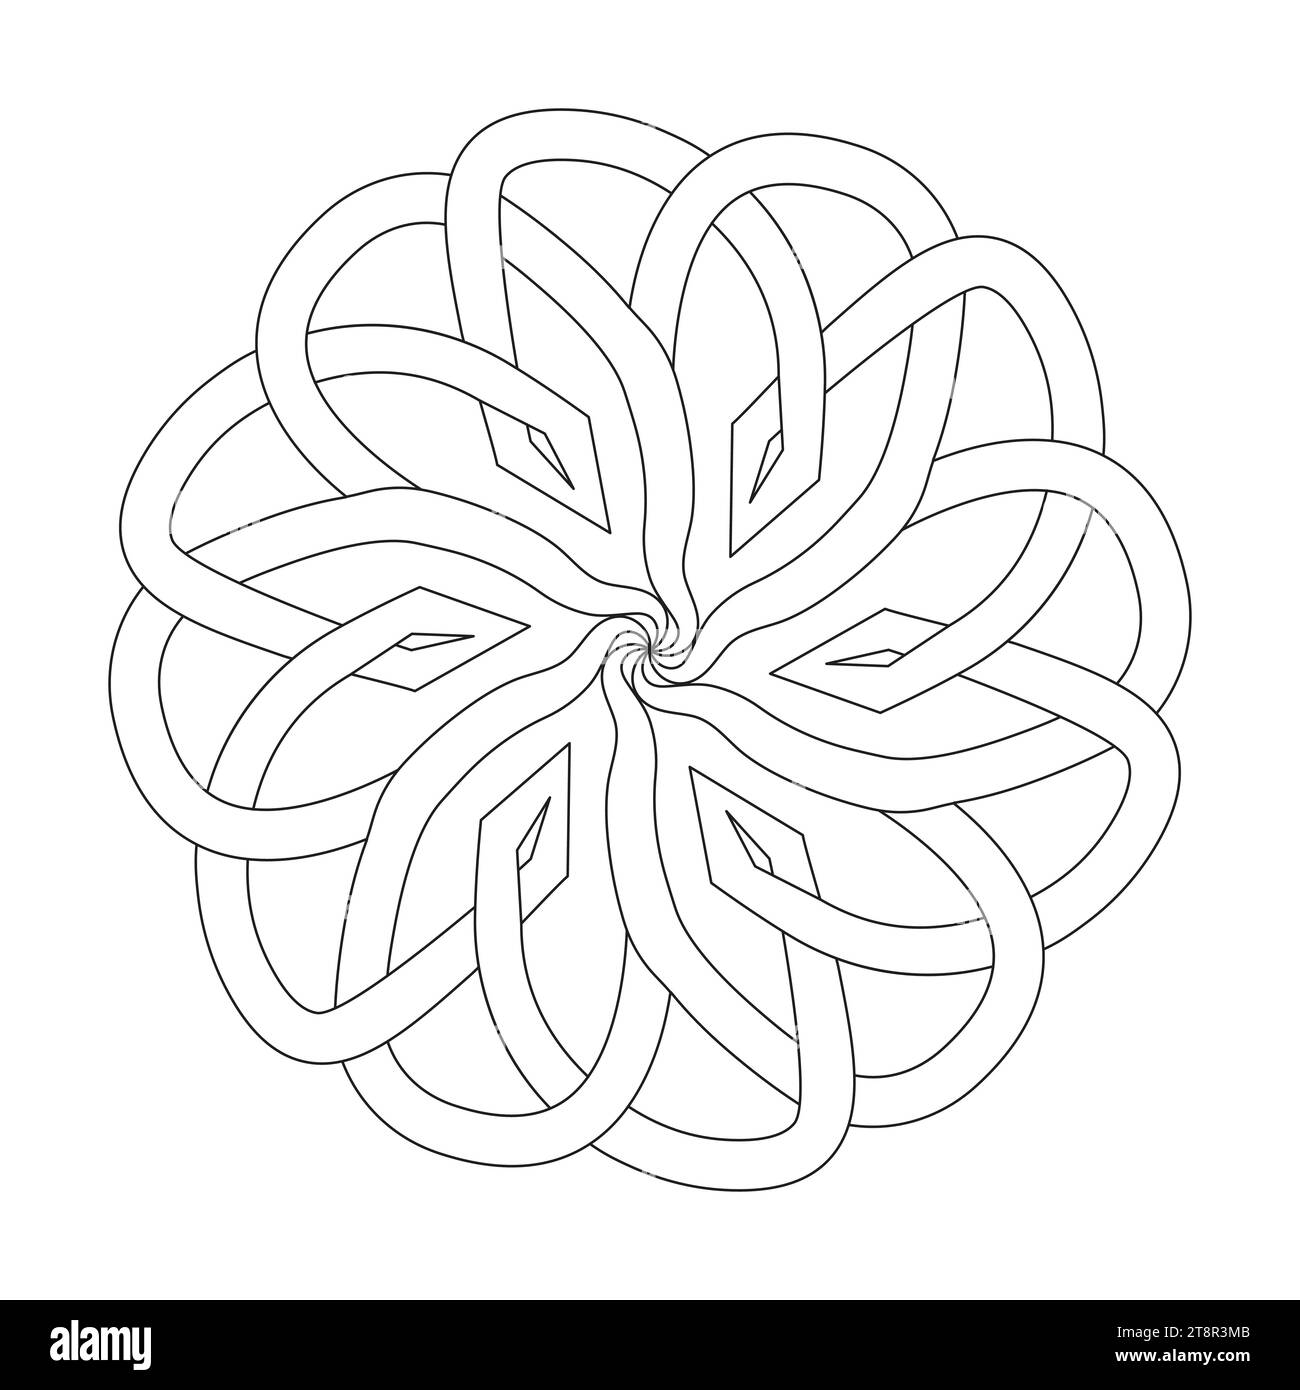 The World's Best Big Magical Mandalas Coloring Book: Floating